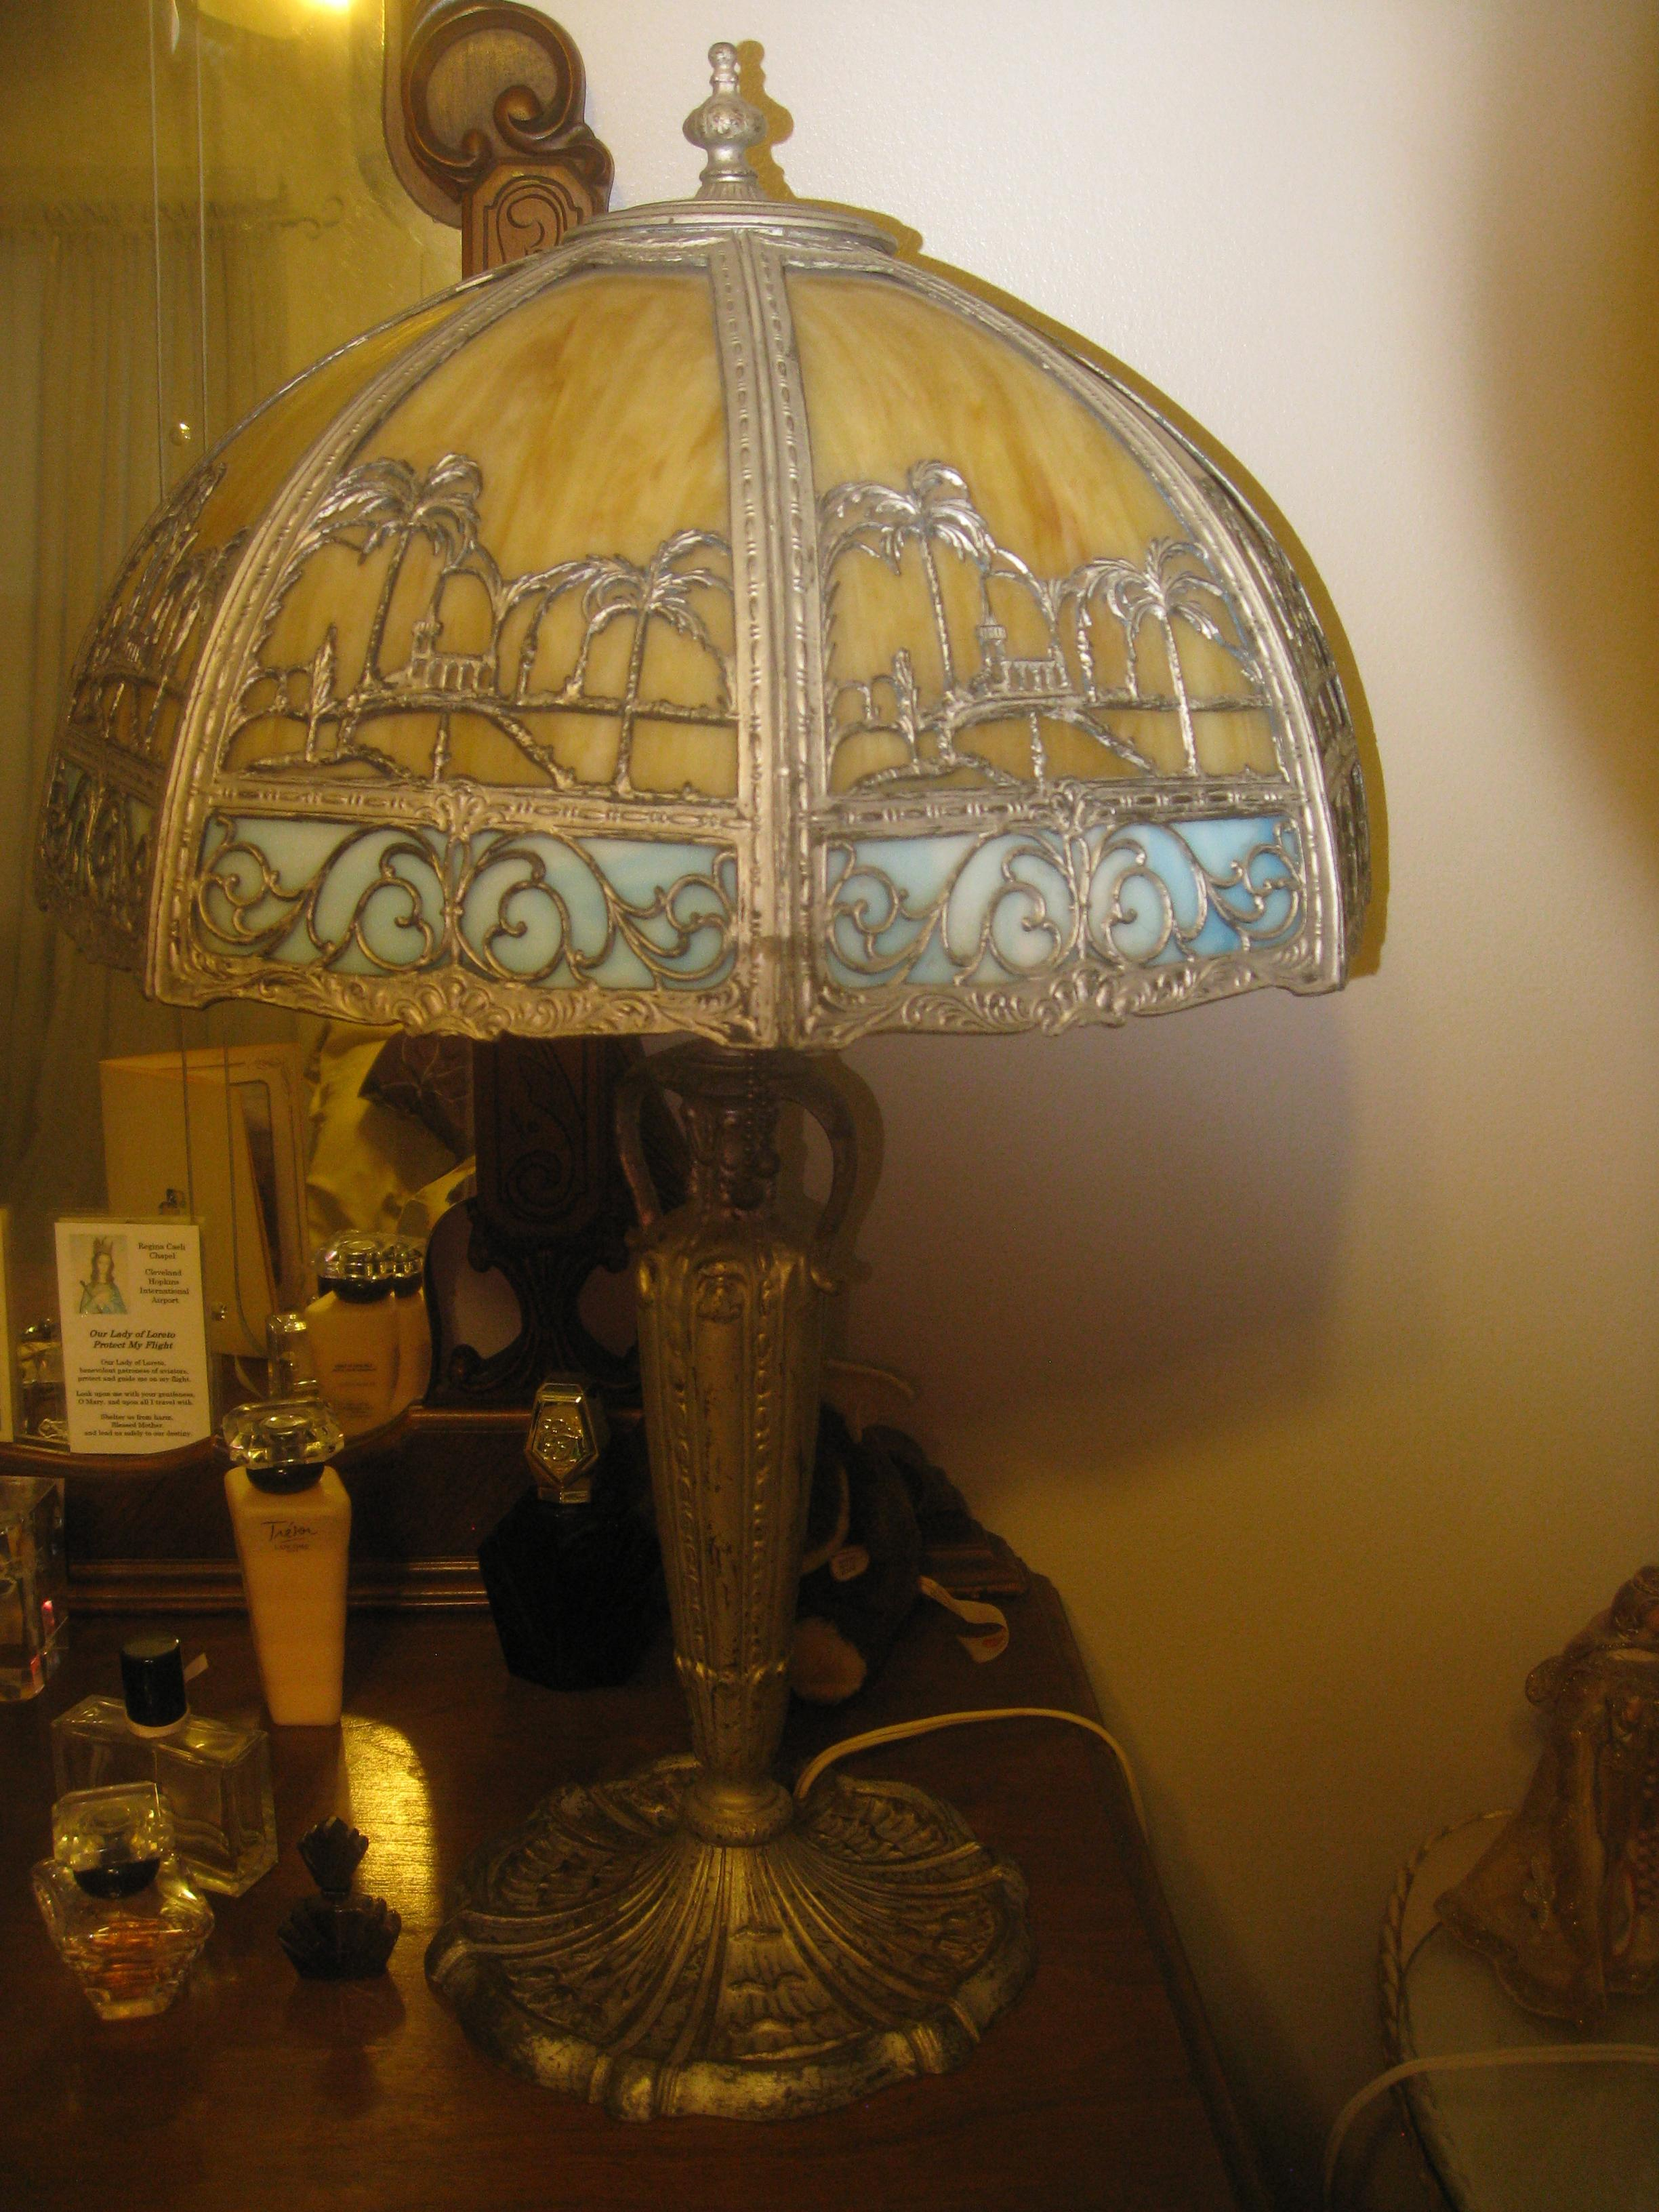 Antique Tiffany Style Lamp Antique Appraisal Instappraisal within size 2448 X 3264